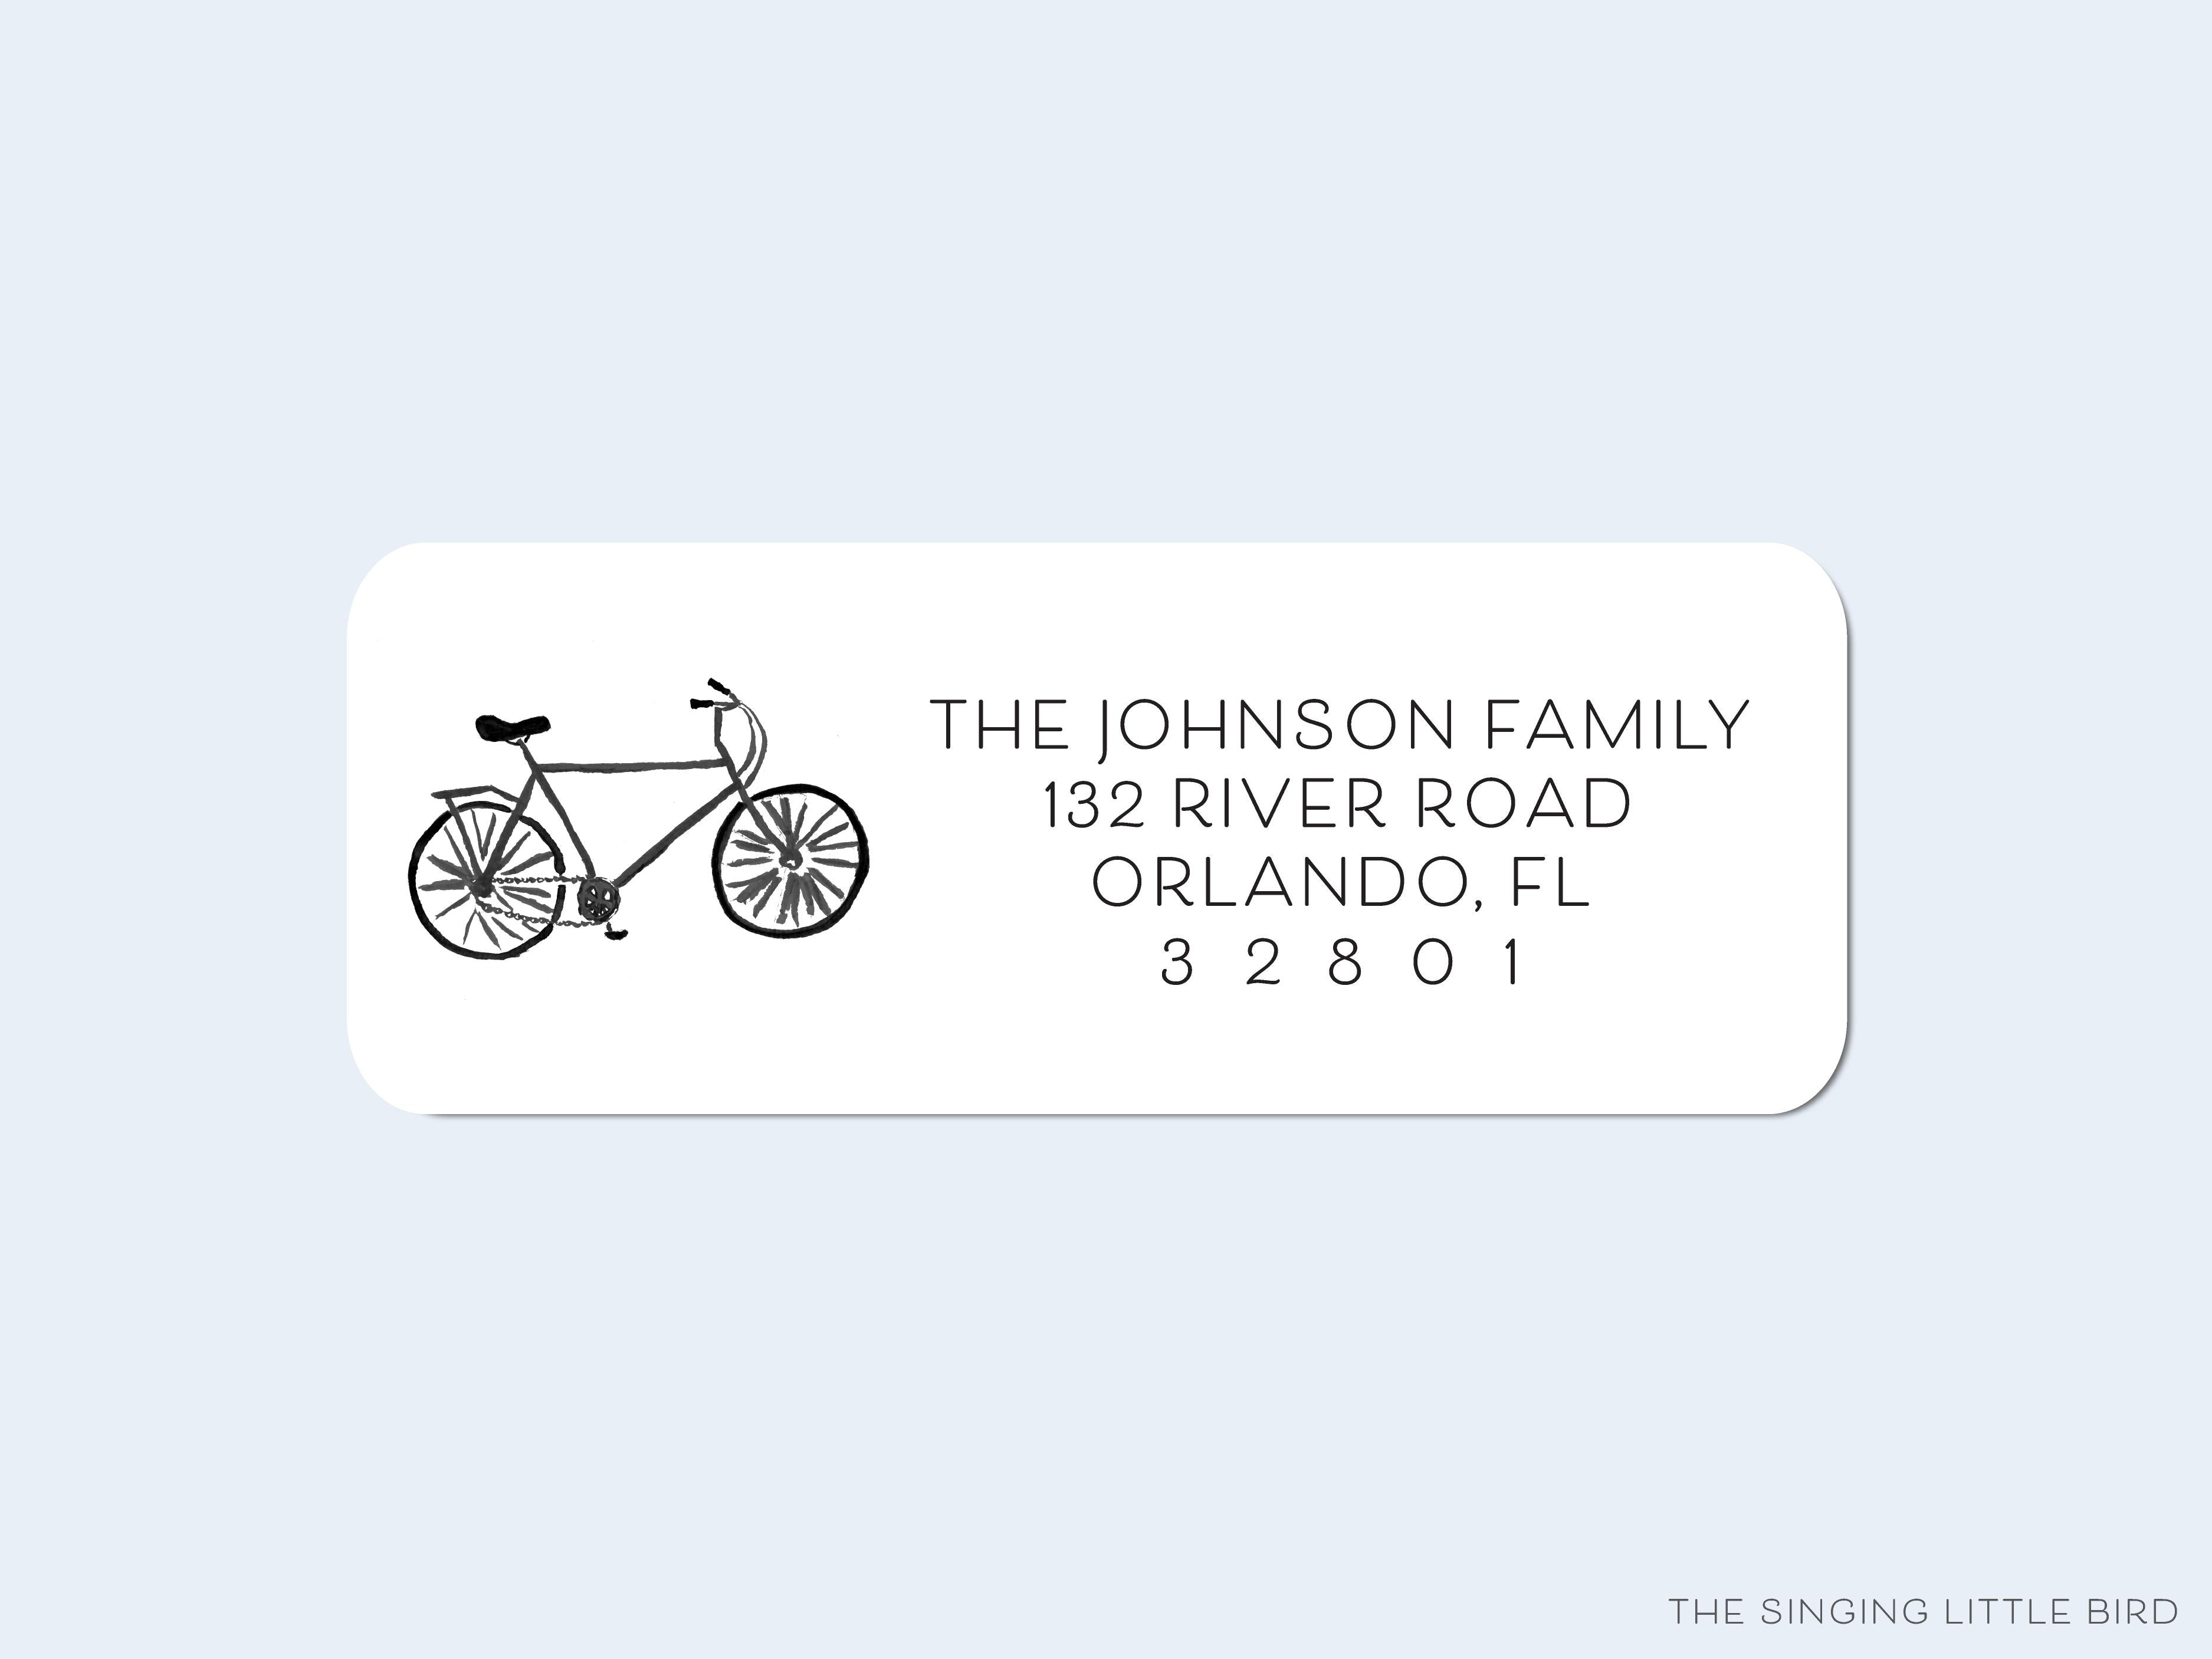 Black Bicycle Return Address Labels-These personalized return address labels are 2.625" x 1" and feature our hand-painted watercolor bicycle, printed in the USA on beautiful matte finish labels. These make great gifts for yourself or the bike lover.-The Singing Little Bird